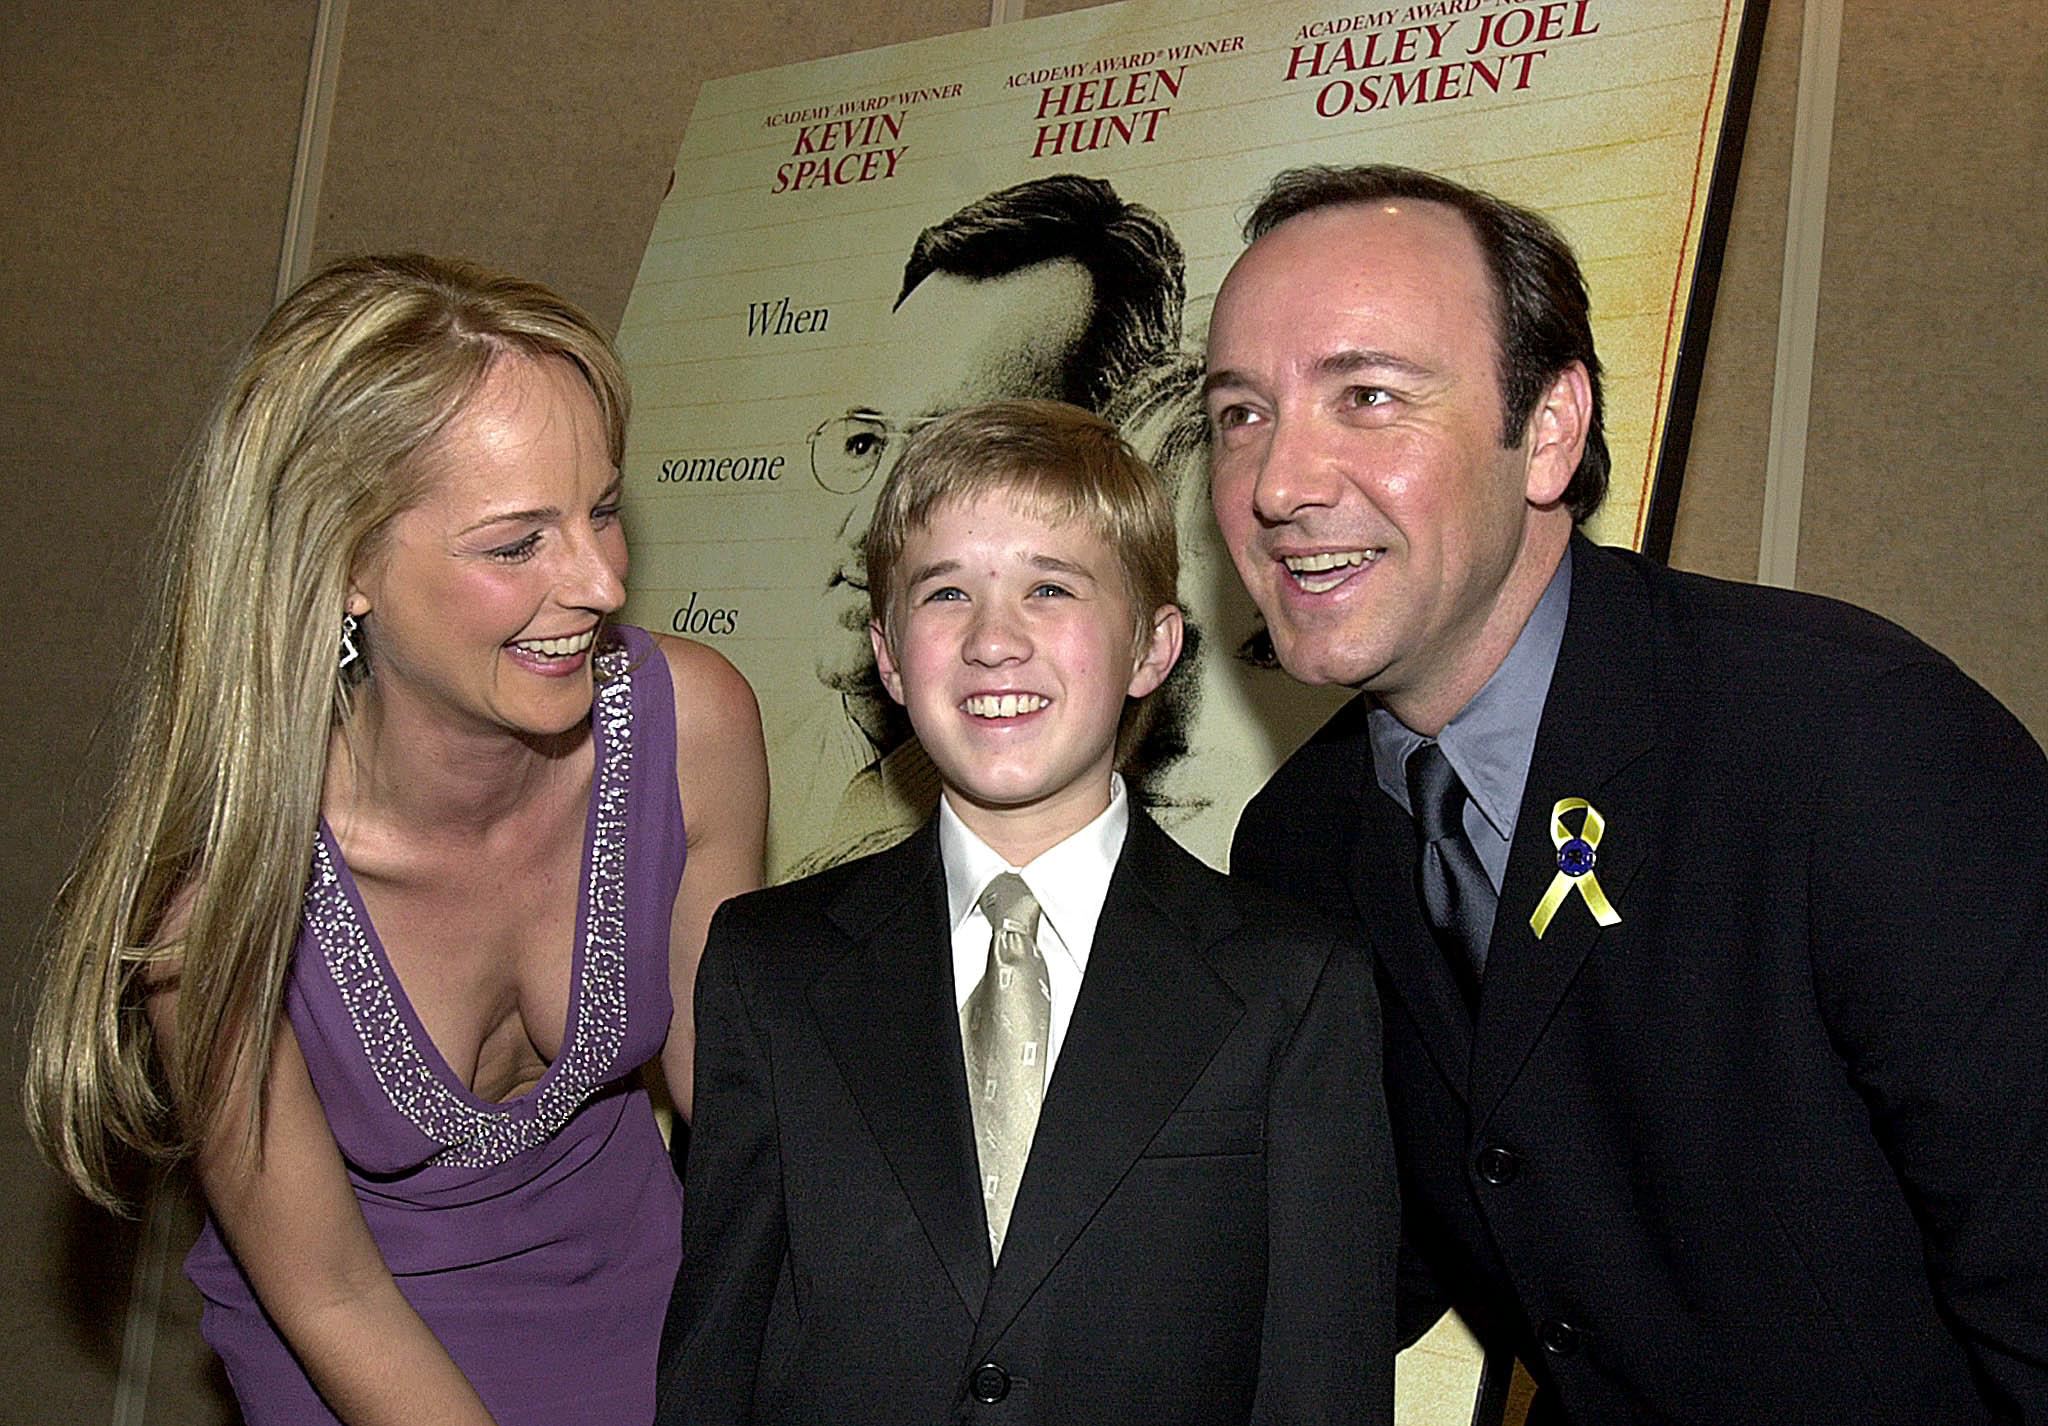 Helen Hunt, Haley Osment and Kevin Spacey pose at the premiere of "Pay It Forward," 2000 | Source: Getty Images